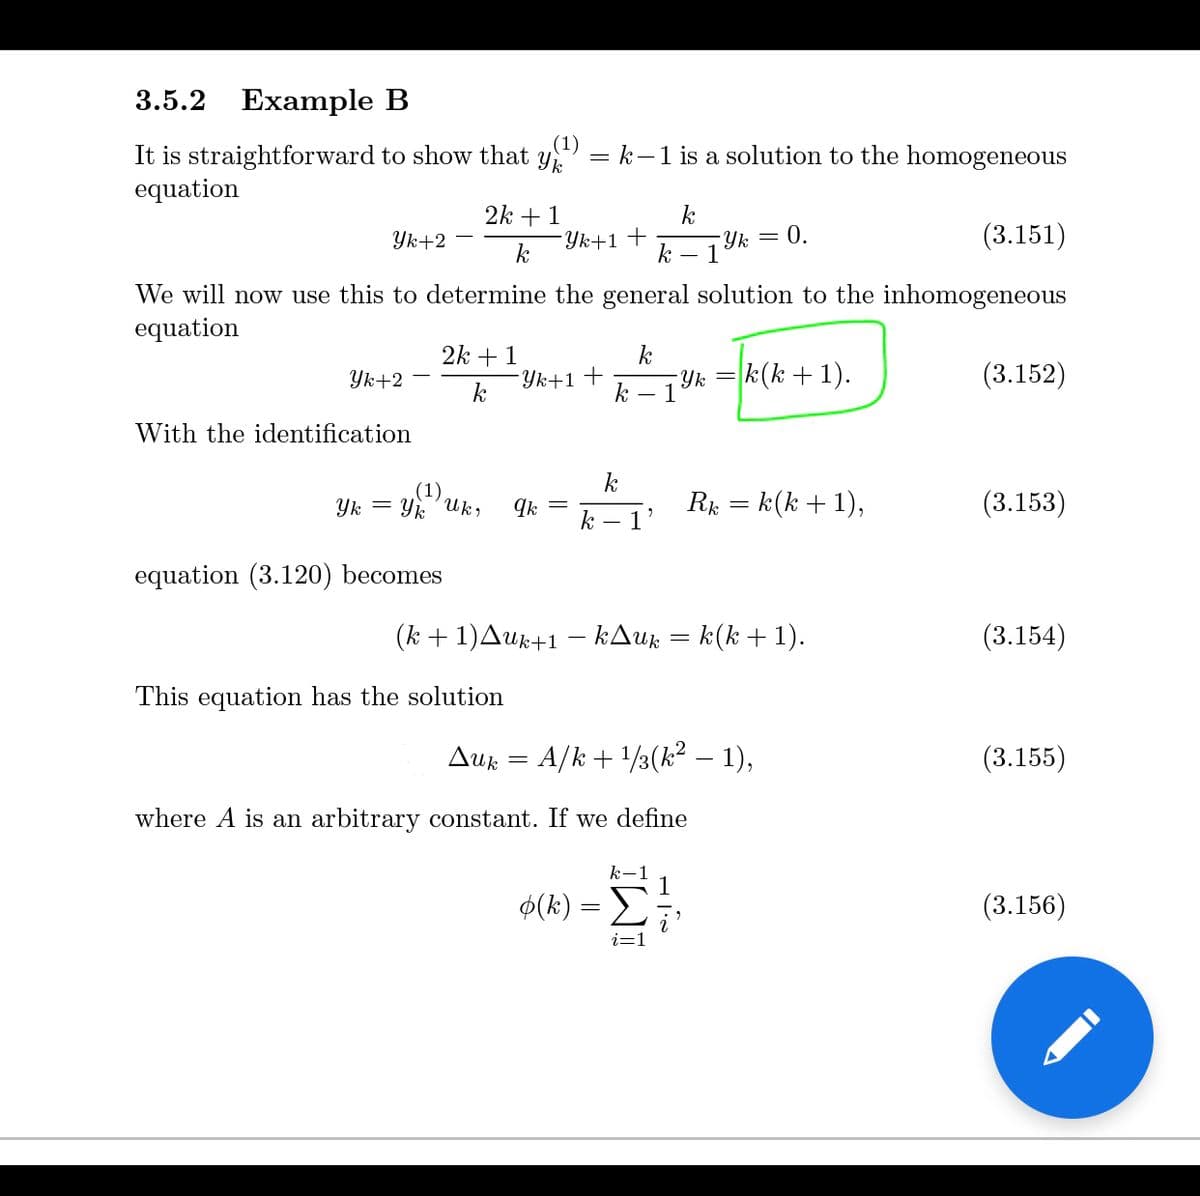 3.5.2
Example B
(1)
It is straightforward to show that y
equation
= k-1 is a solution to the homogeneous
2k + 1
k
Yk = 0.
- 1
(3.151)
Yk+2
Yk+1+
We will now use this to determine the general solution to the inhomogeneous
equation
2k + 1
k
Yk+1+
Yk
k
1
k(k + 1).
Yk+2
(3.152)
k
With the identification
k
Yk
Yk
Uk,
R: = k(k + 1),
(3.153)
k
equation (3.120) becomes
(k + 1)Auk+1 – kAuz = k(k + 1).
(3.154)
This equation has the solution
Auk = A/k + /3(k² – 1),
(3.155)
where A is an arbitrary constant. If we define
k-1
$(k)
(3.156)
IWI
